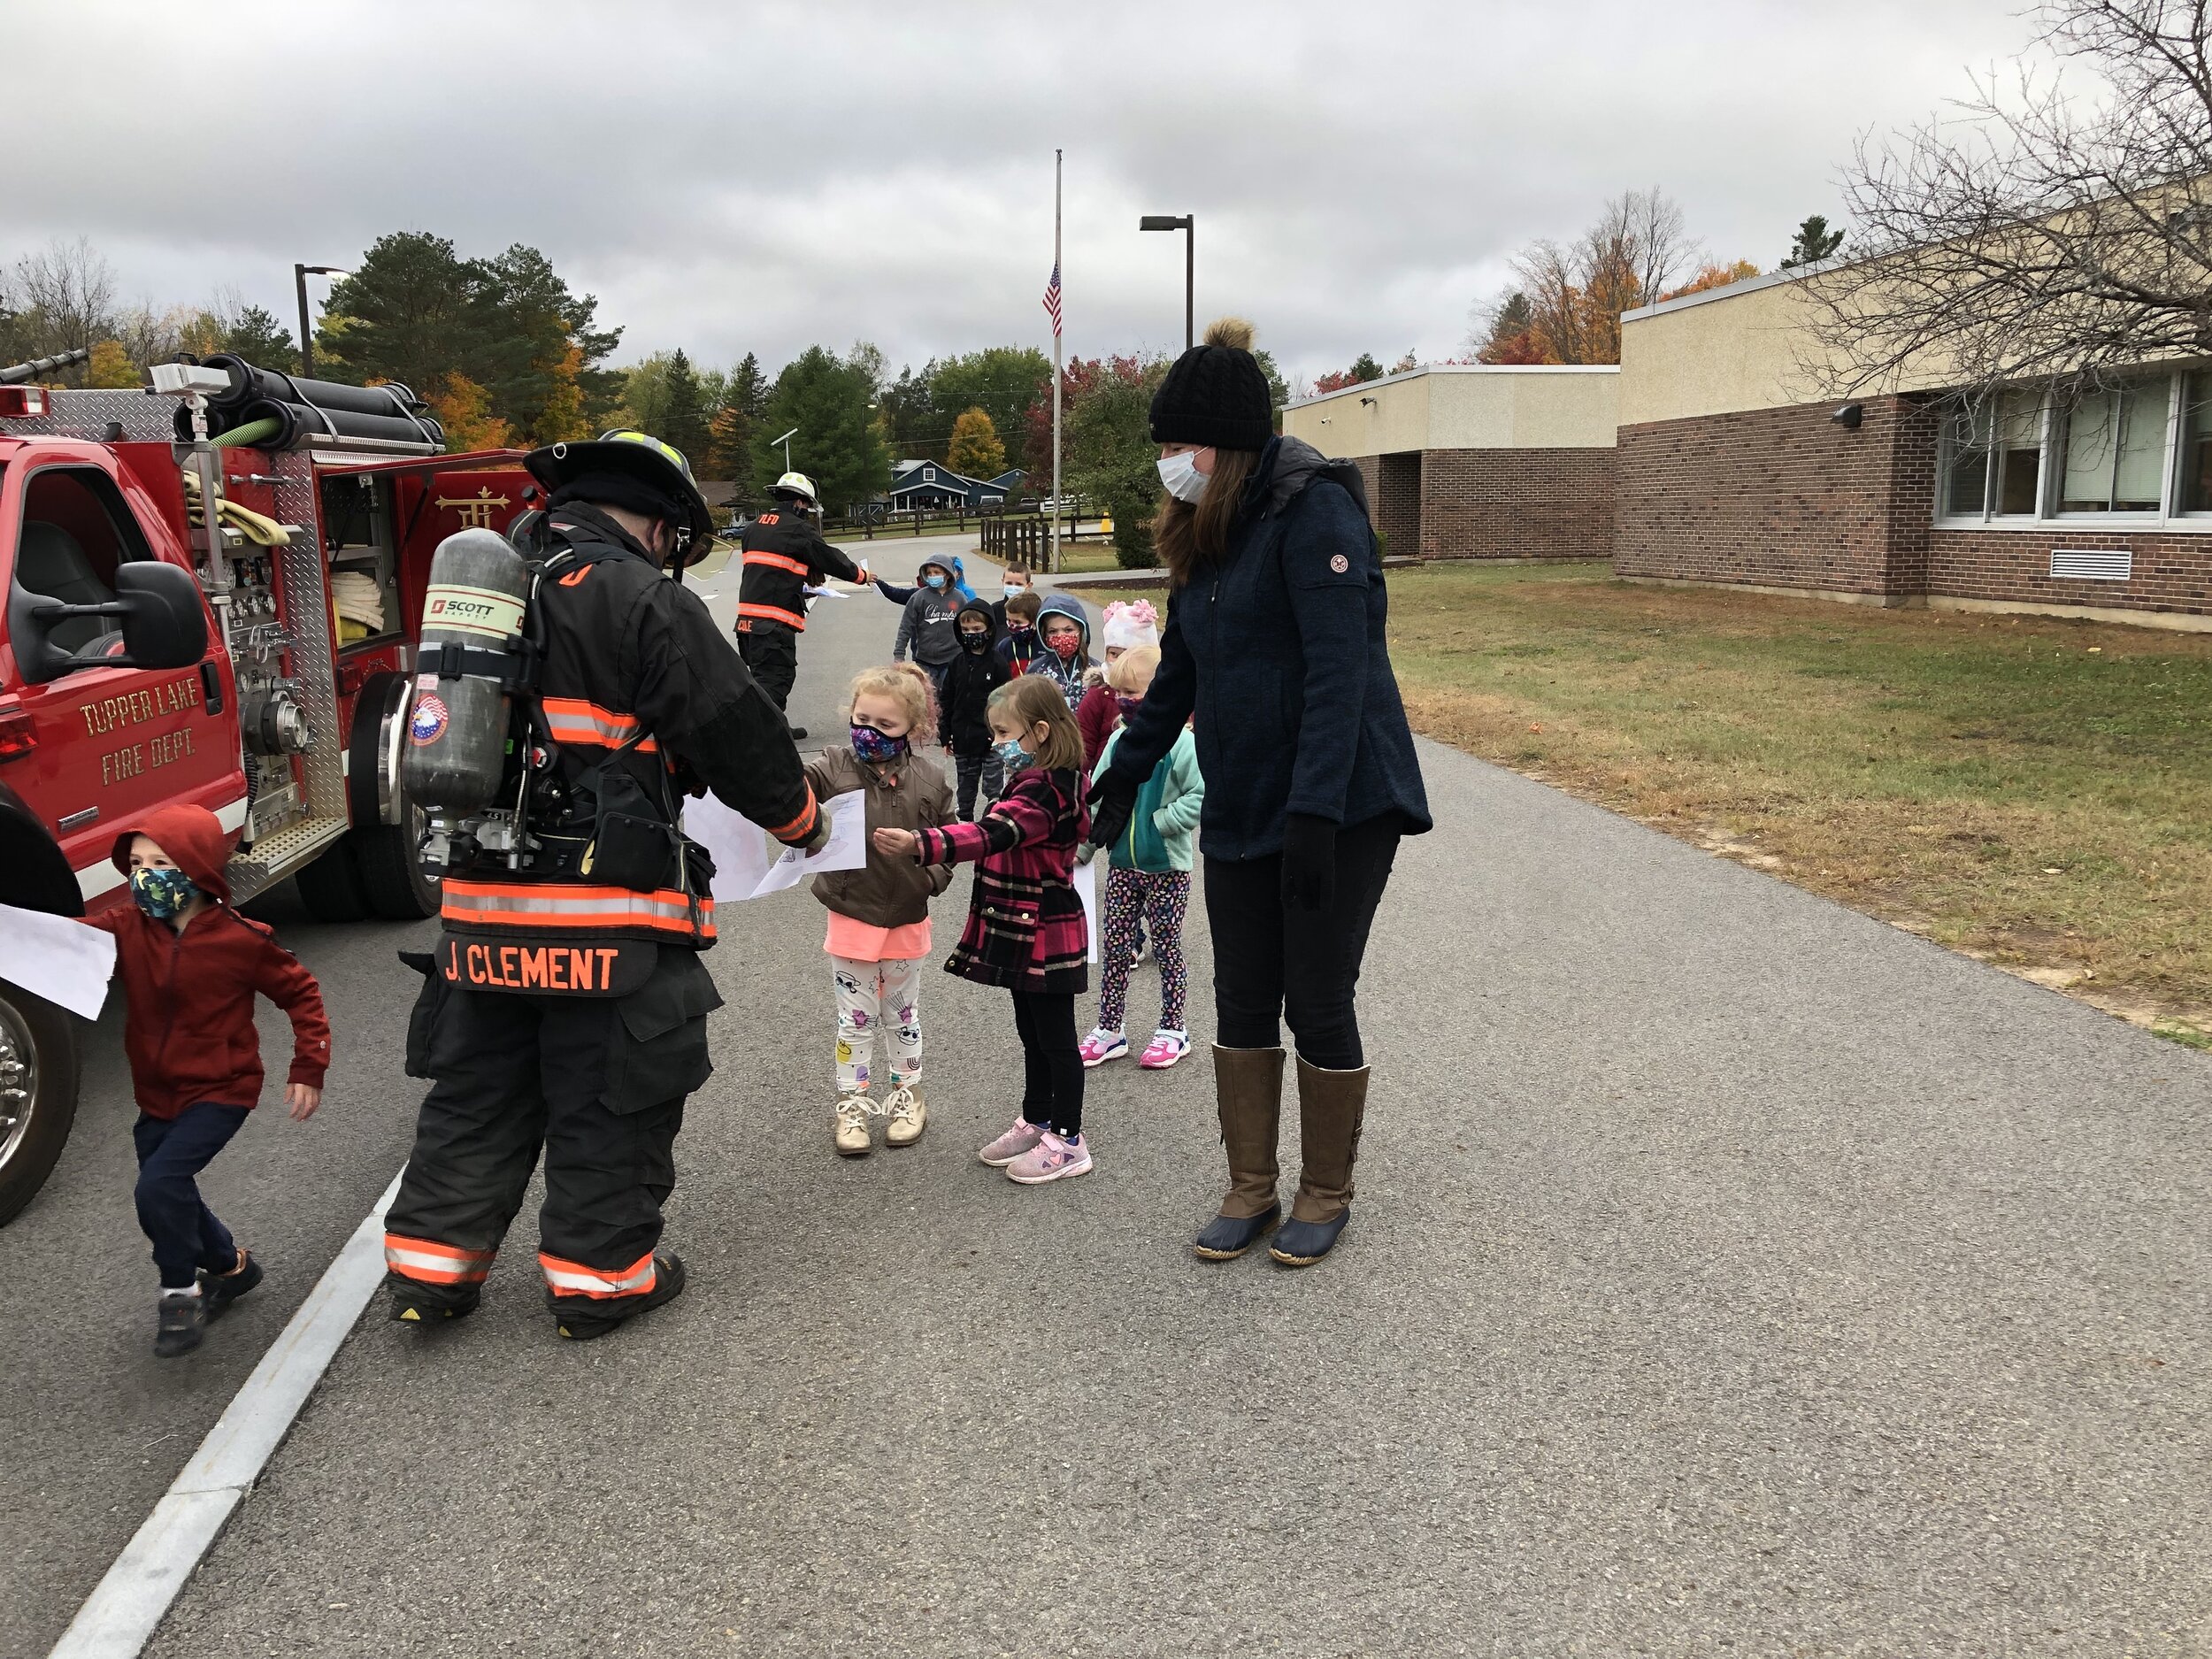   Children in Mrs. Safford's kindergarten class hand out drawings about Fire Prevention Week they made for the visiting firemen Thursday.  